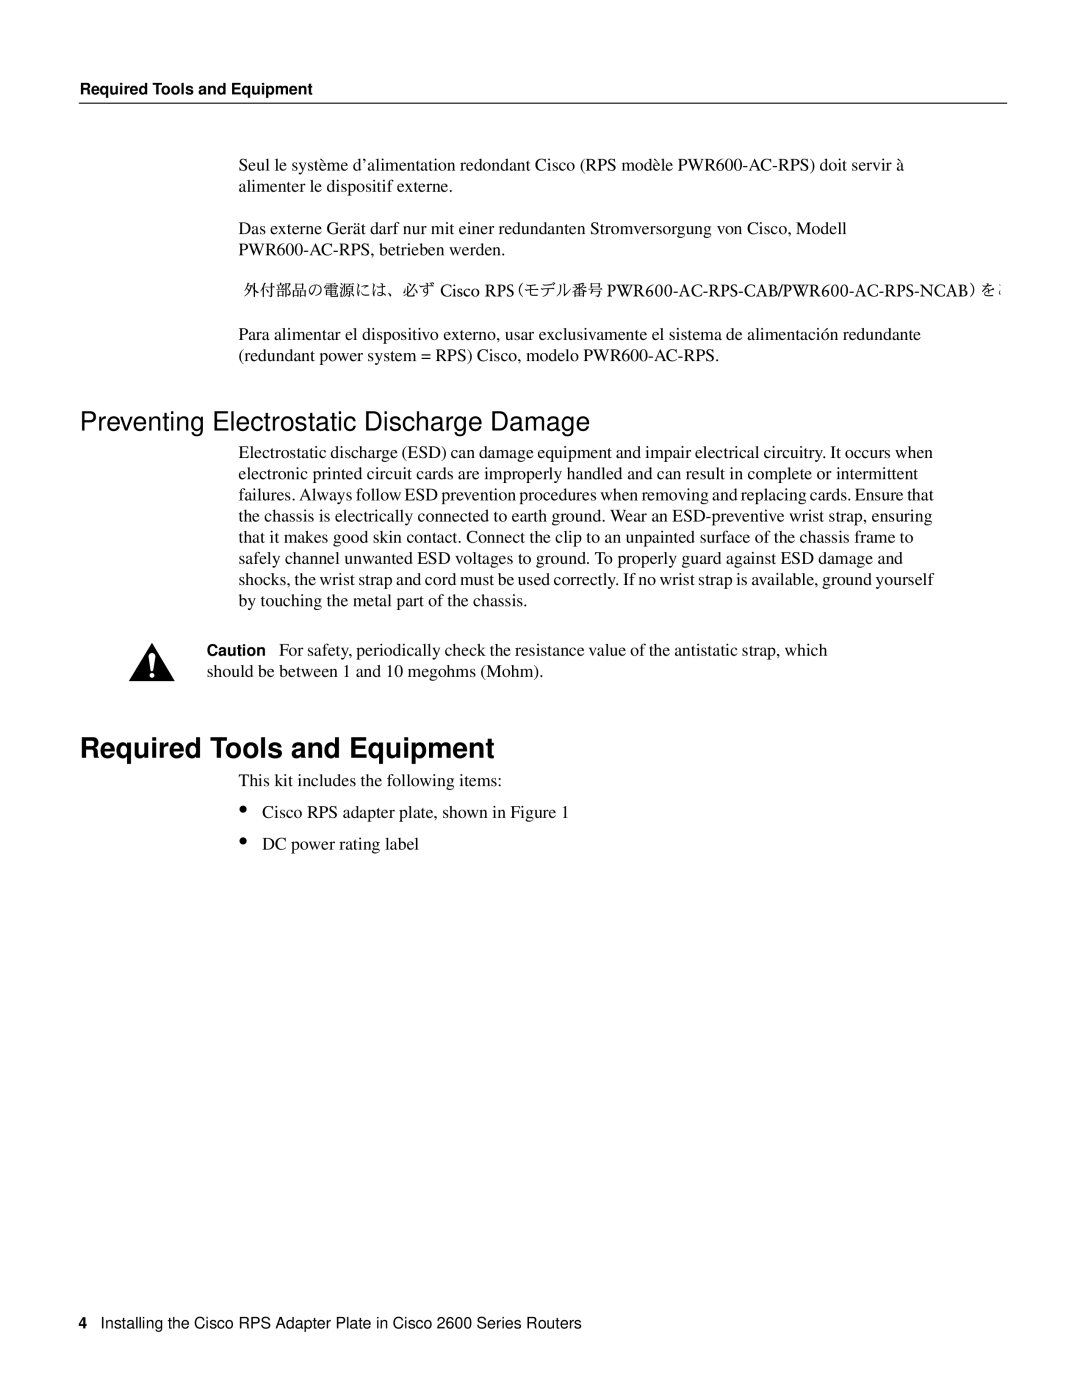 Cisco Systems 2600 Series manual Required Tools and Equipment, Preventing Electrostatic Discharge Damage 